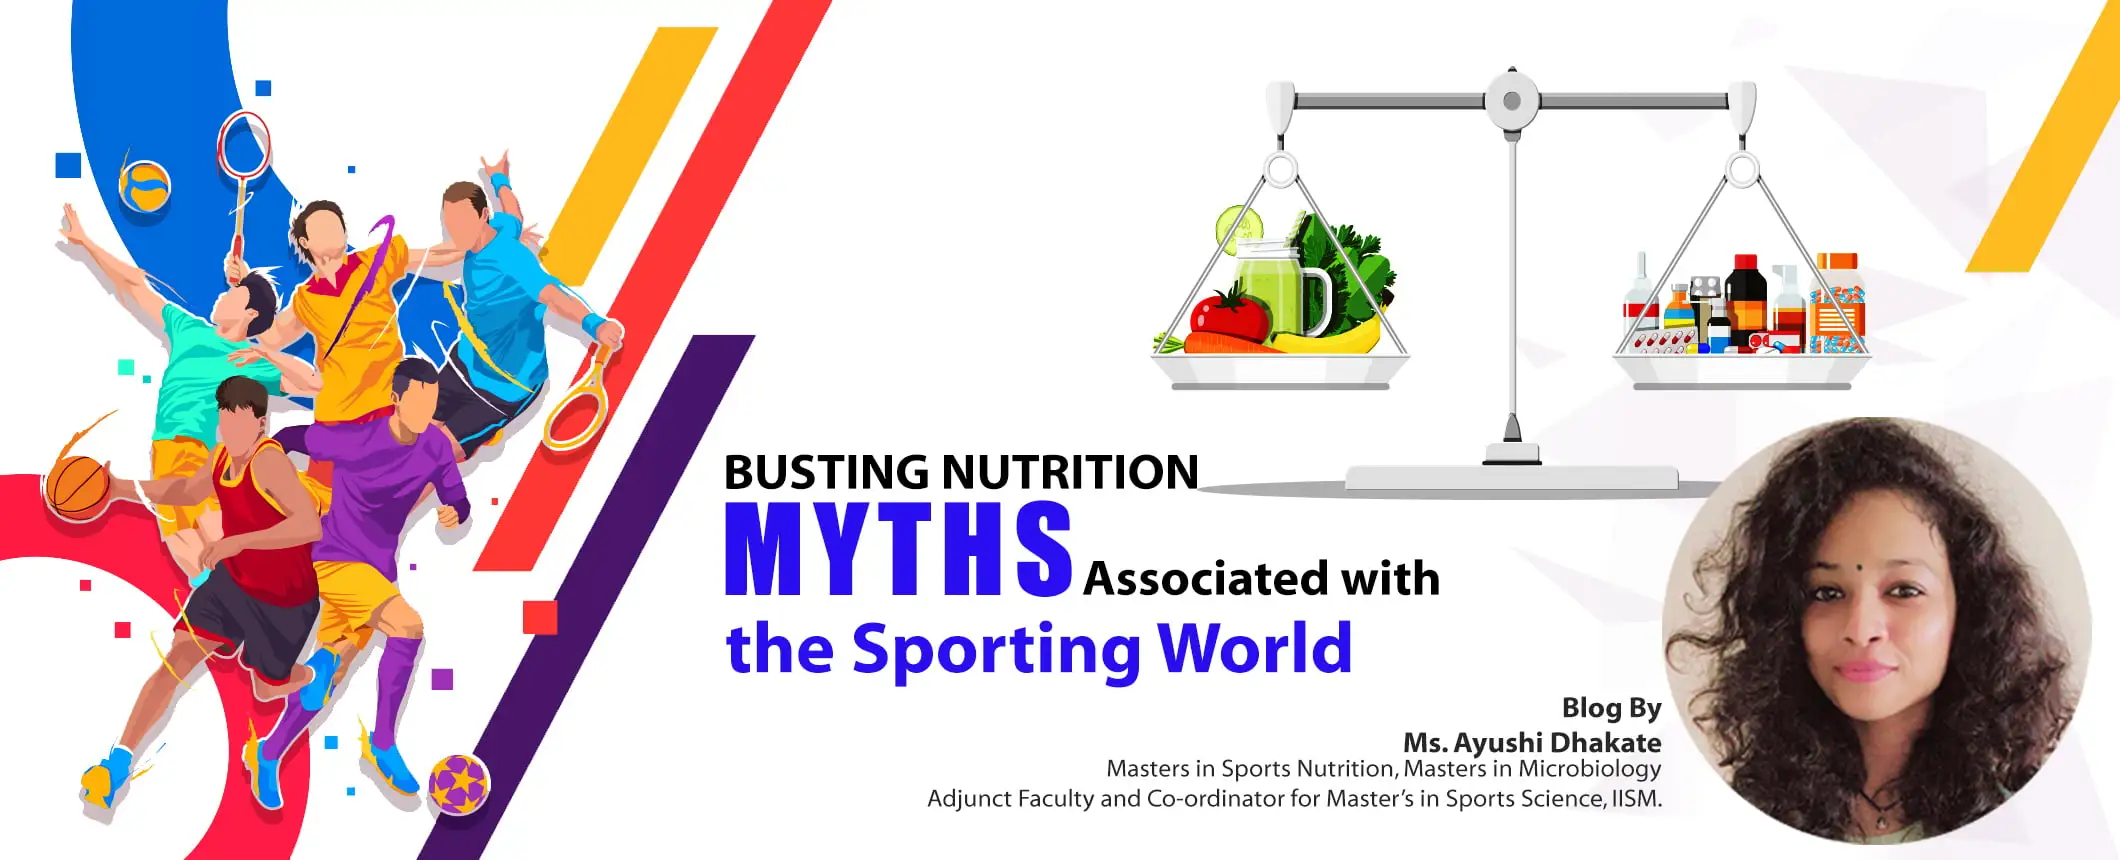 Busting-Nutrition-Myths-Associated-with-the-Sporting-World